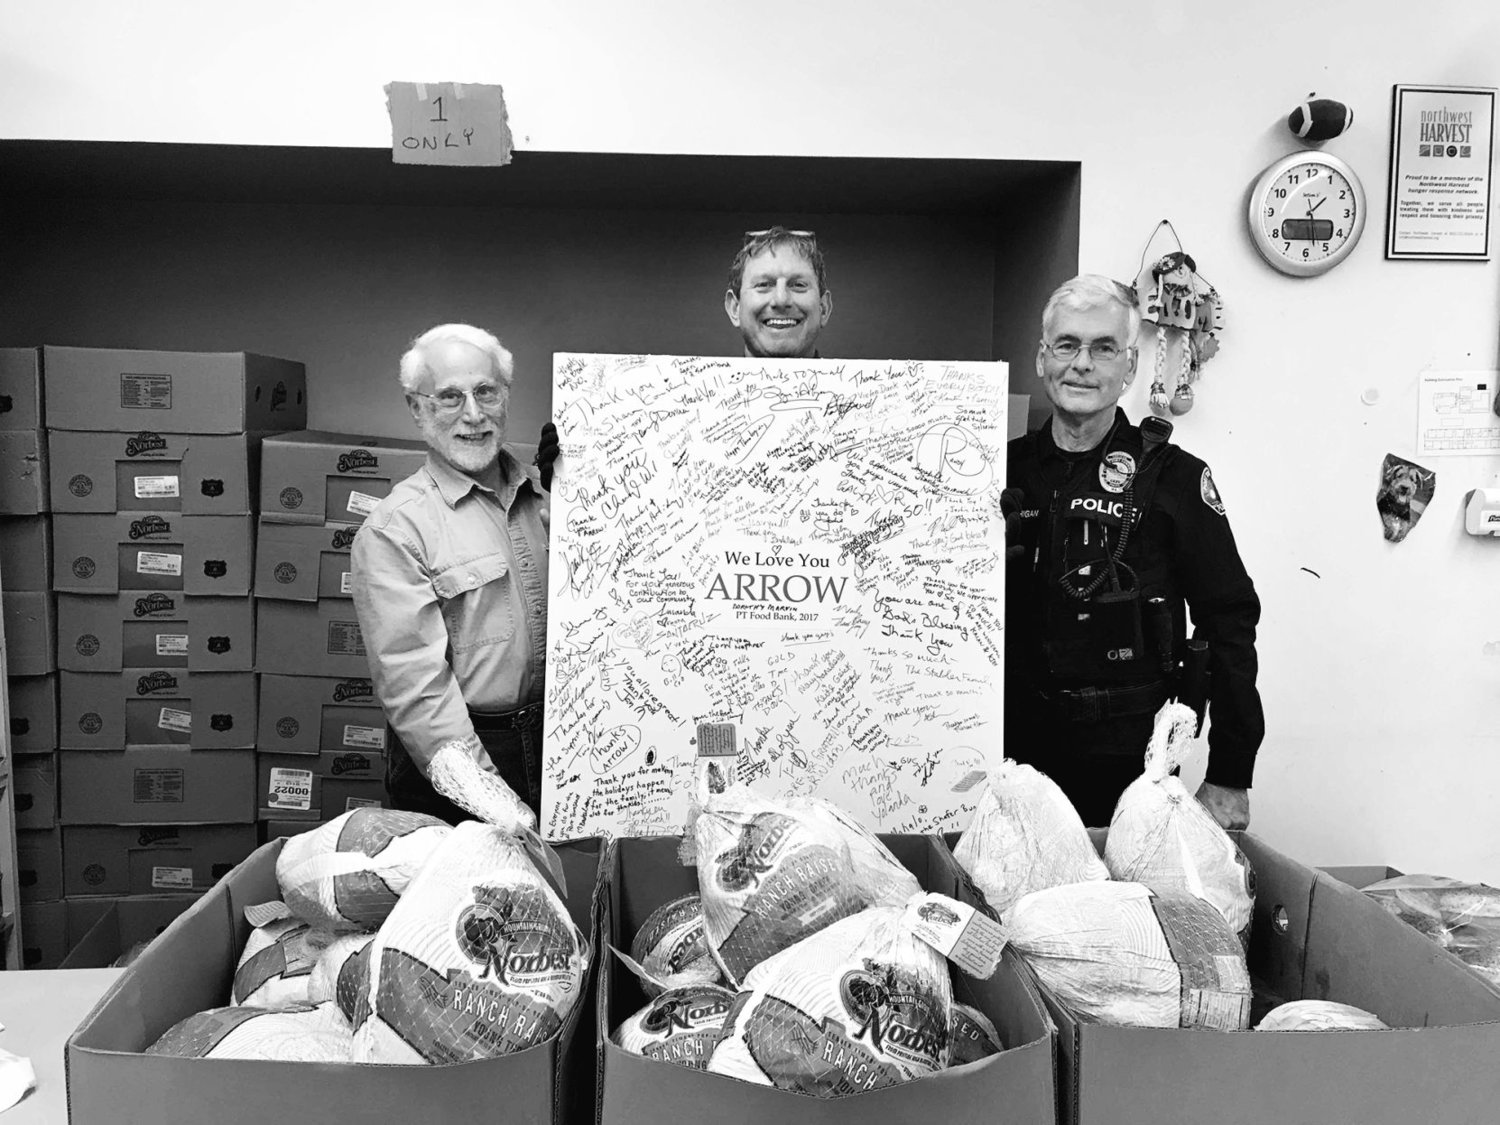 Earll Murman, Arran Stark and Port Townsend police Officer Bill Corrigan stand behind artwork thanking Arrow Lumber for donating turkeys for eight years in a row. Photo courtesy Earll M. Murman